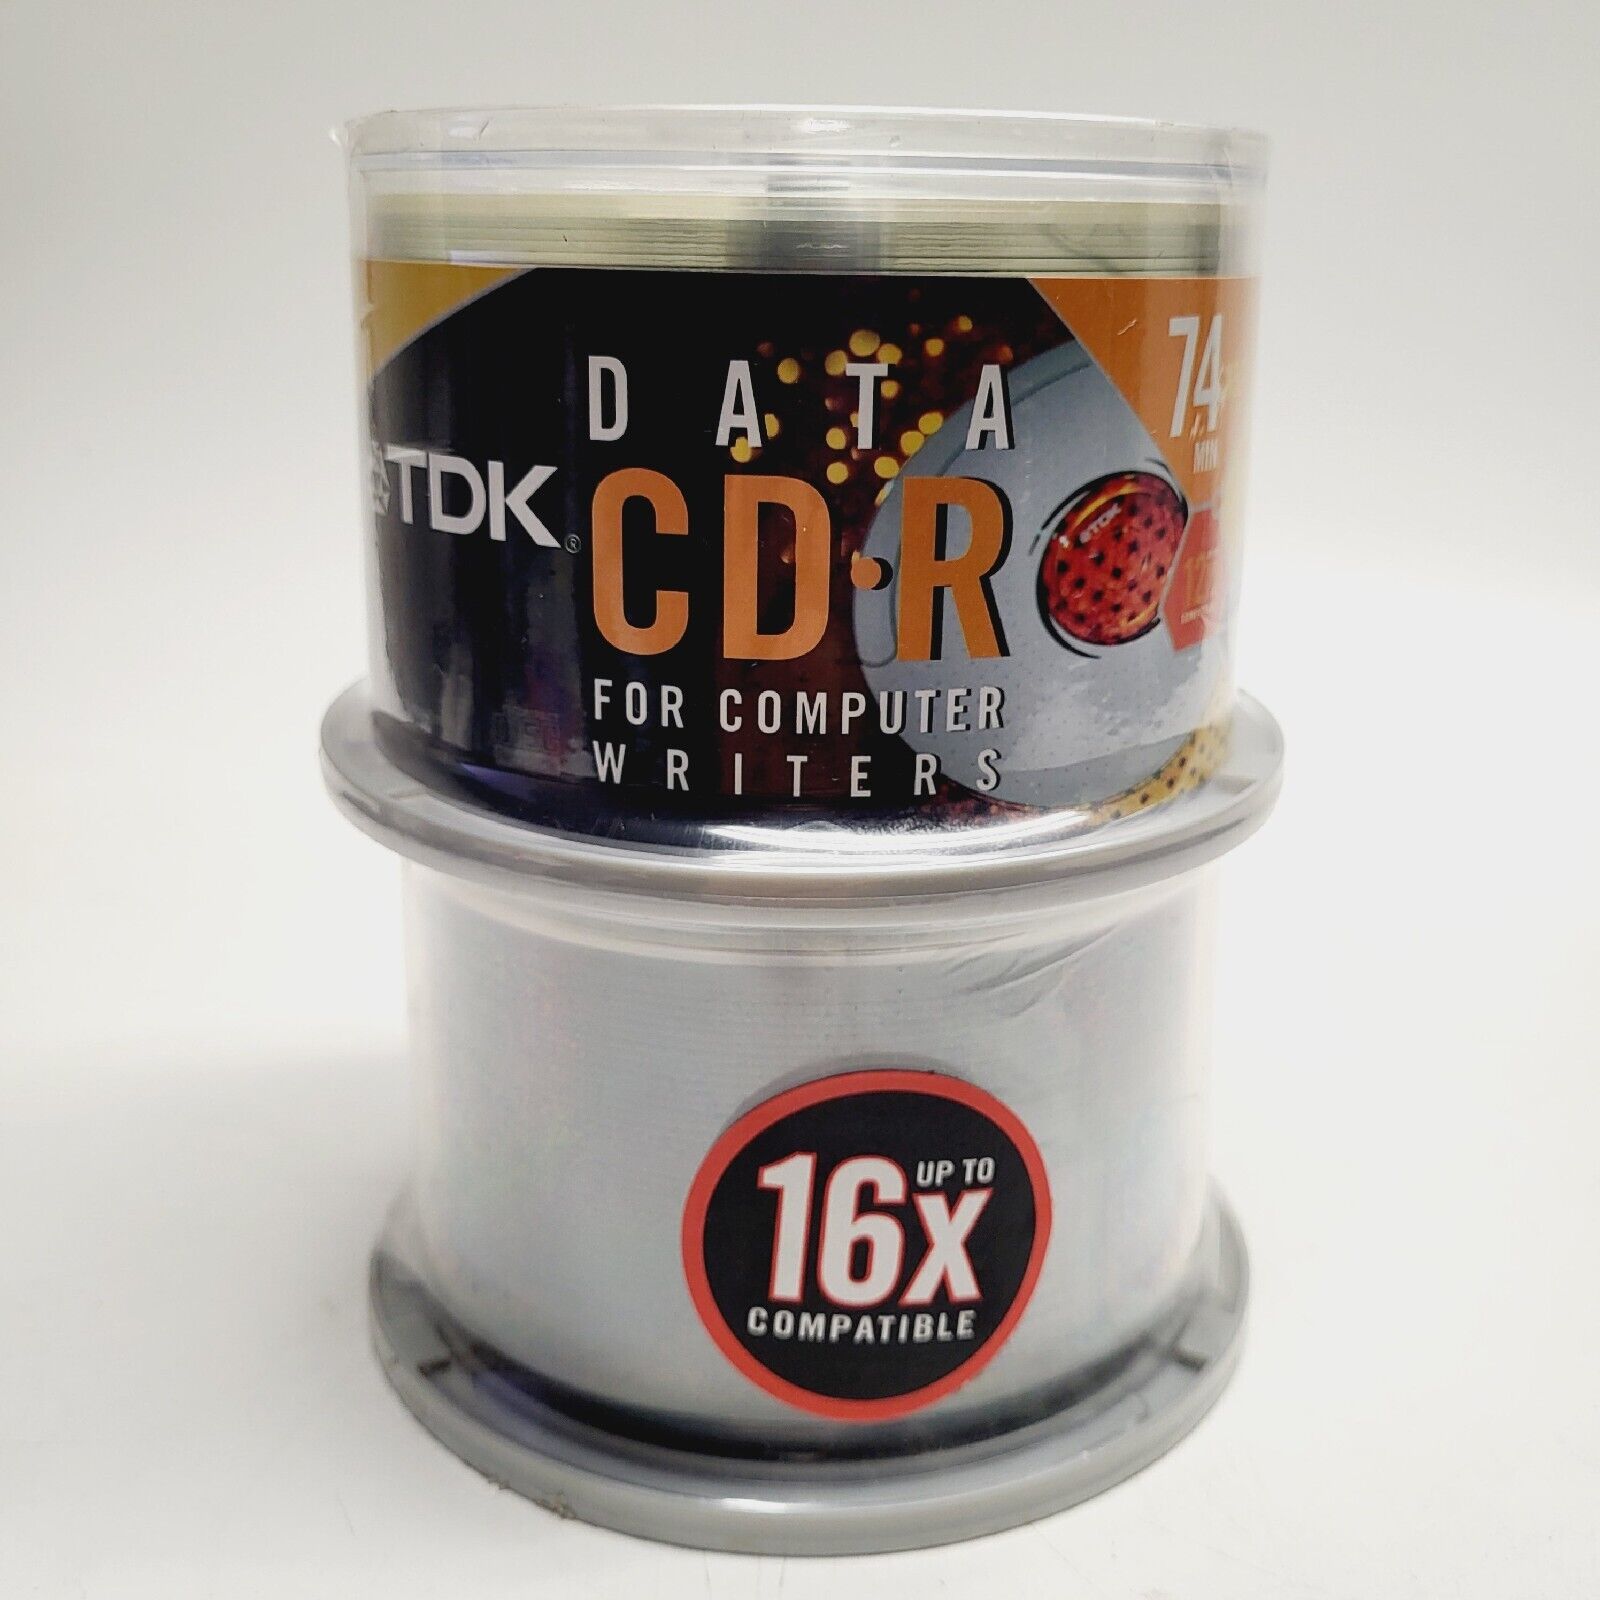 FACTORY SEAL TDK CD-R Data Discs 74 MIN 650 MB 16x Computer Writers 100 Spindle